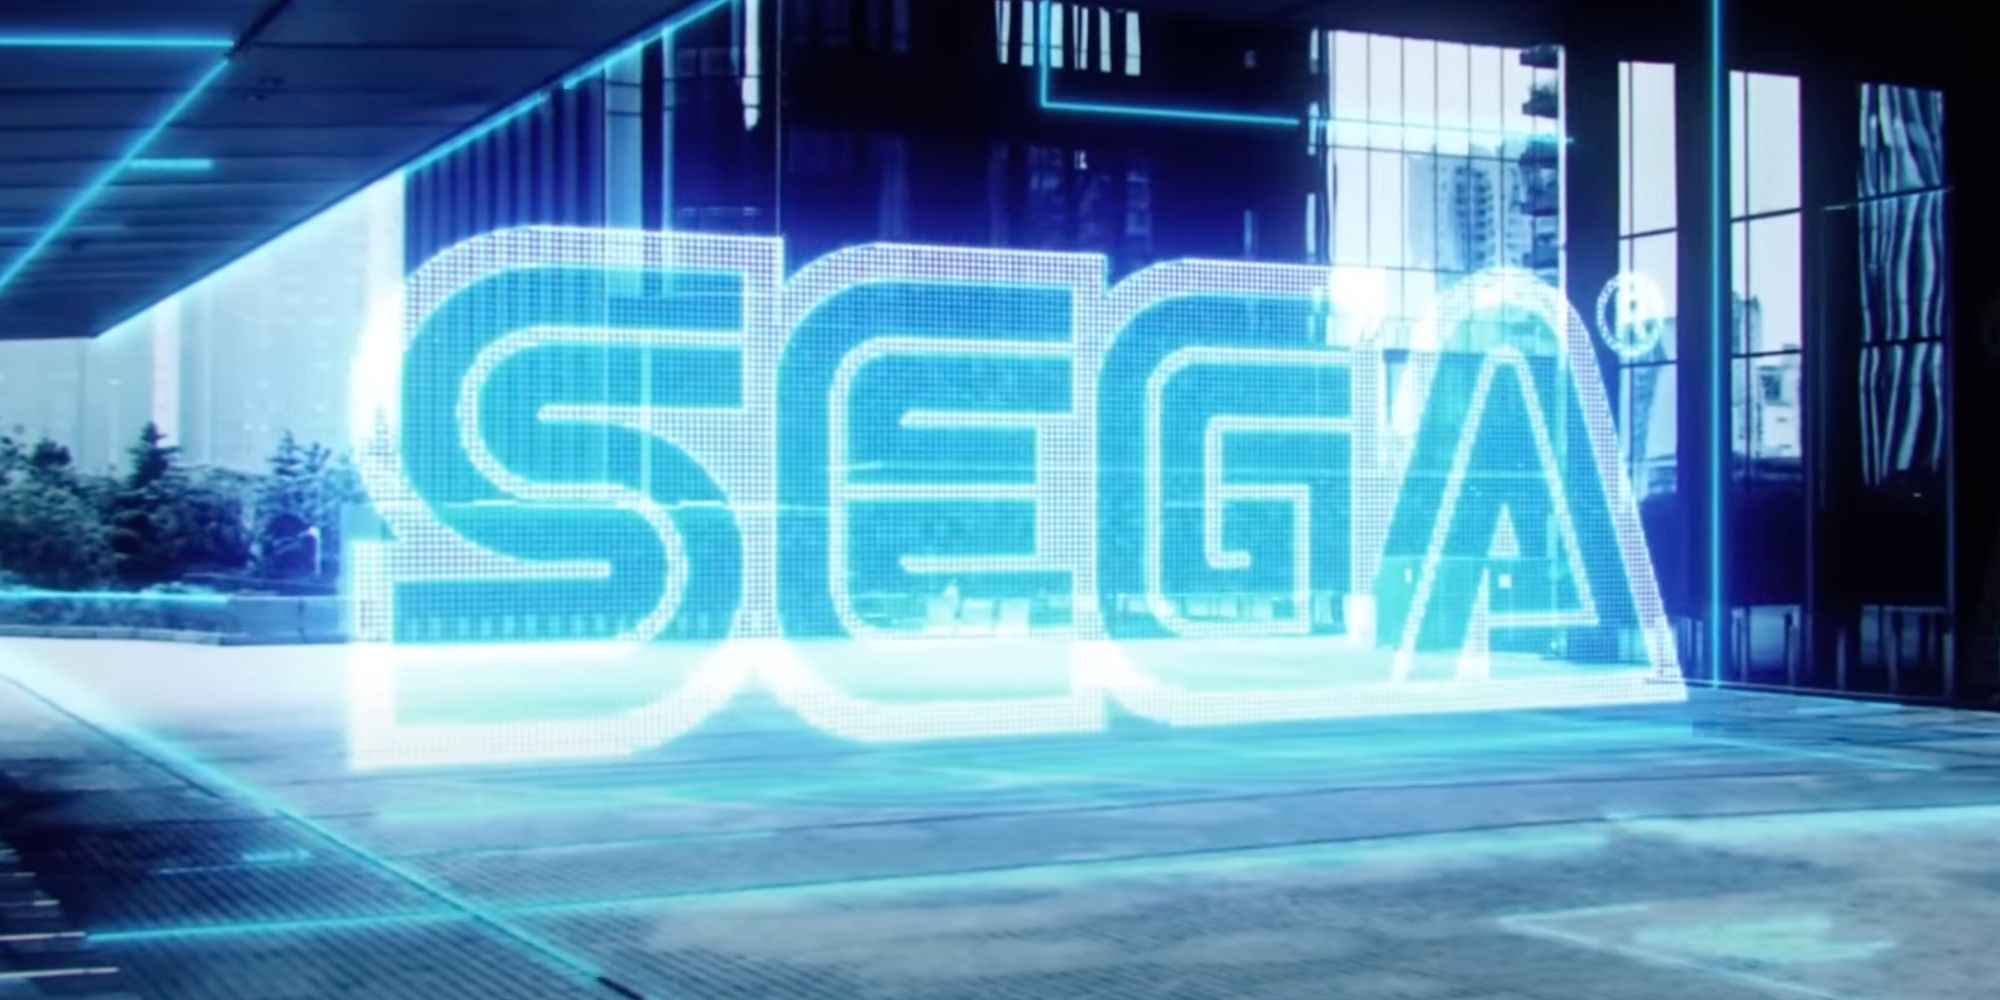 Sega Says It Will Give All Workers A 30 % Pay Rise